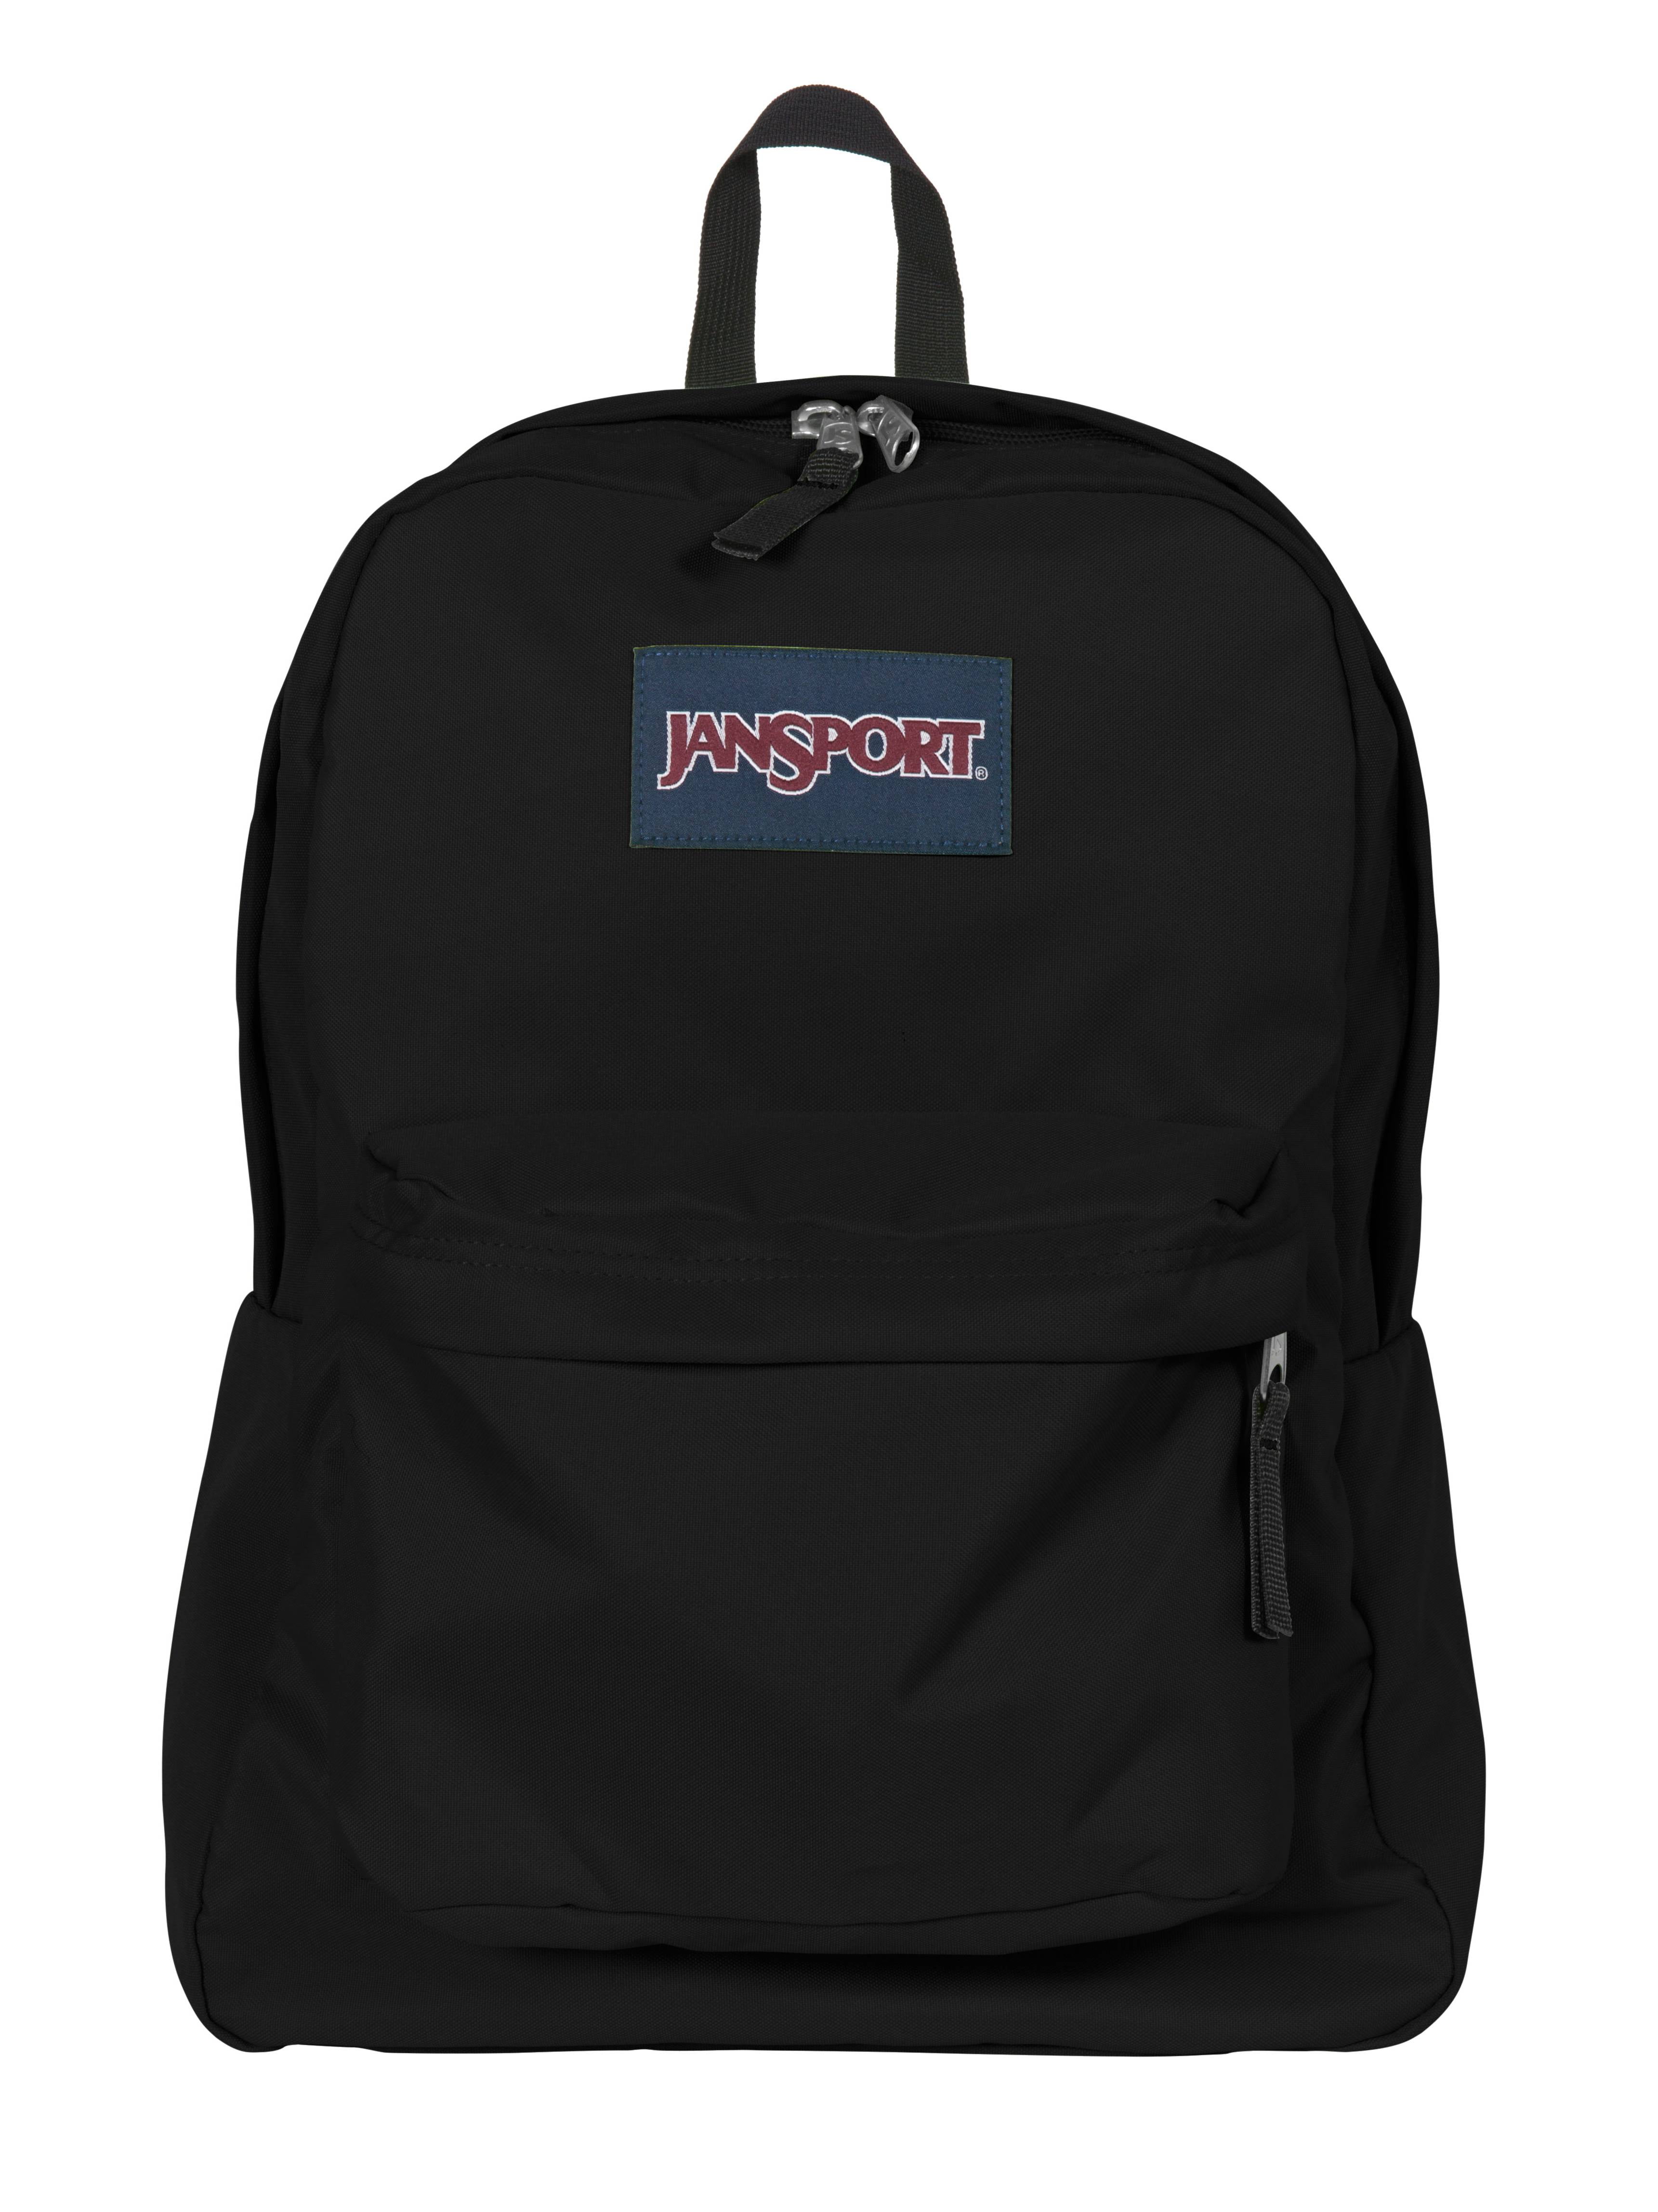 Places That Sell Jansport Backpacks on Sale, 56% OFF | empow-her.com